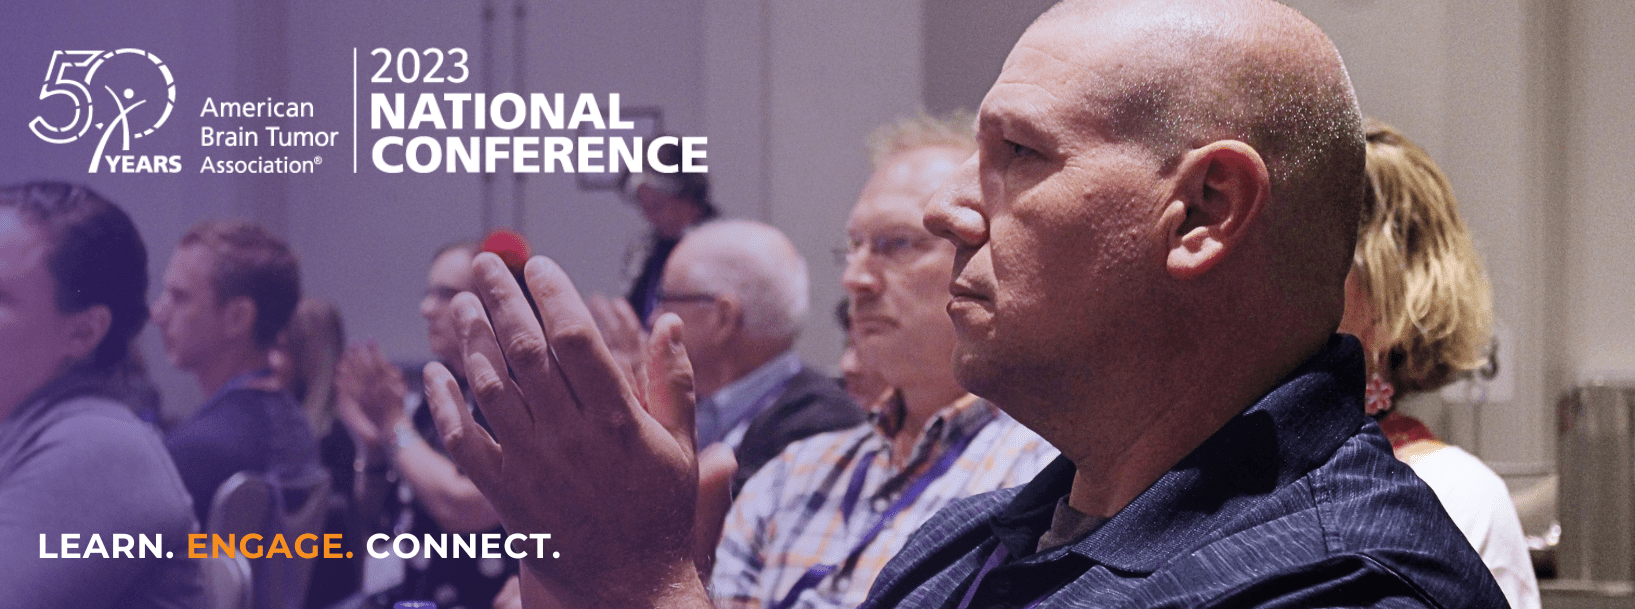 Learn, engage, and connect at the 2023 ABTA National Conference.